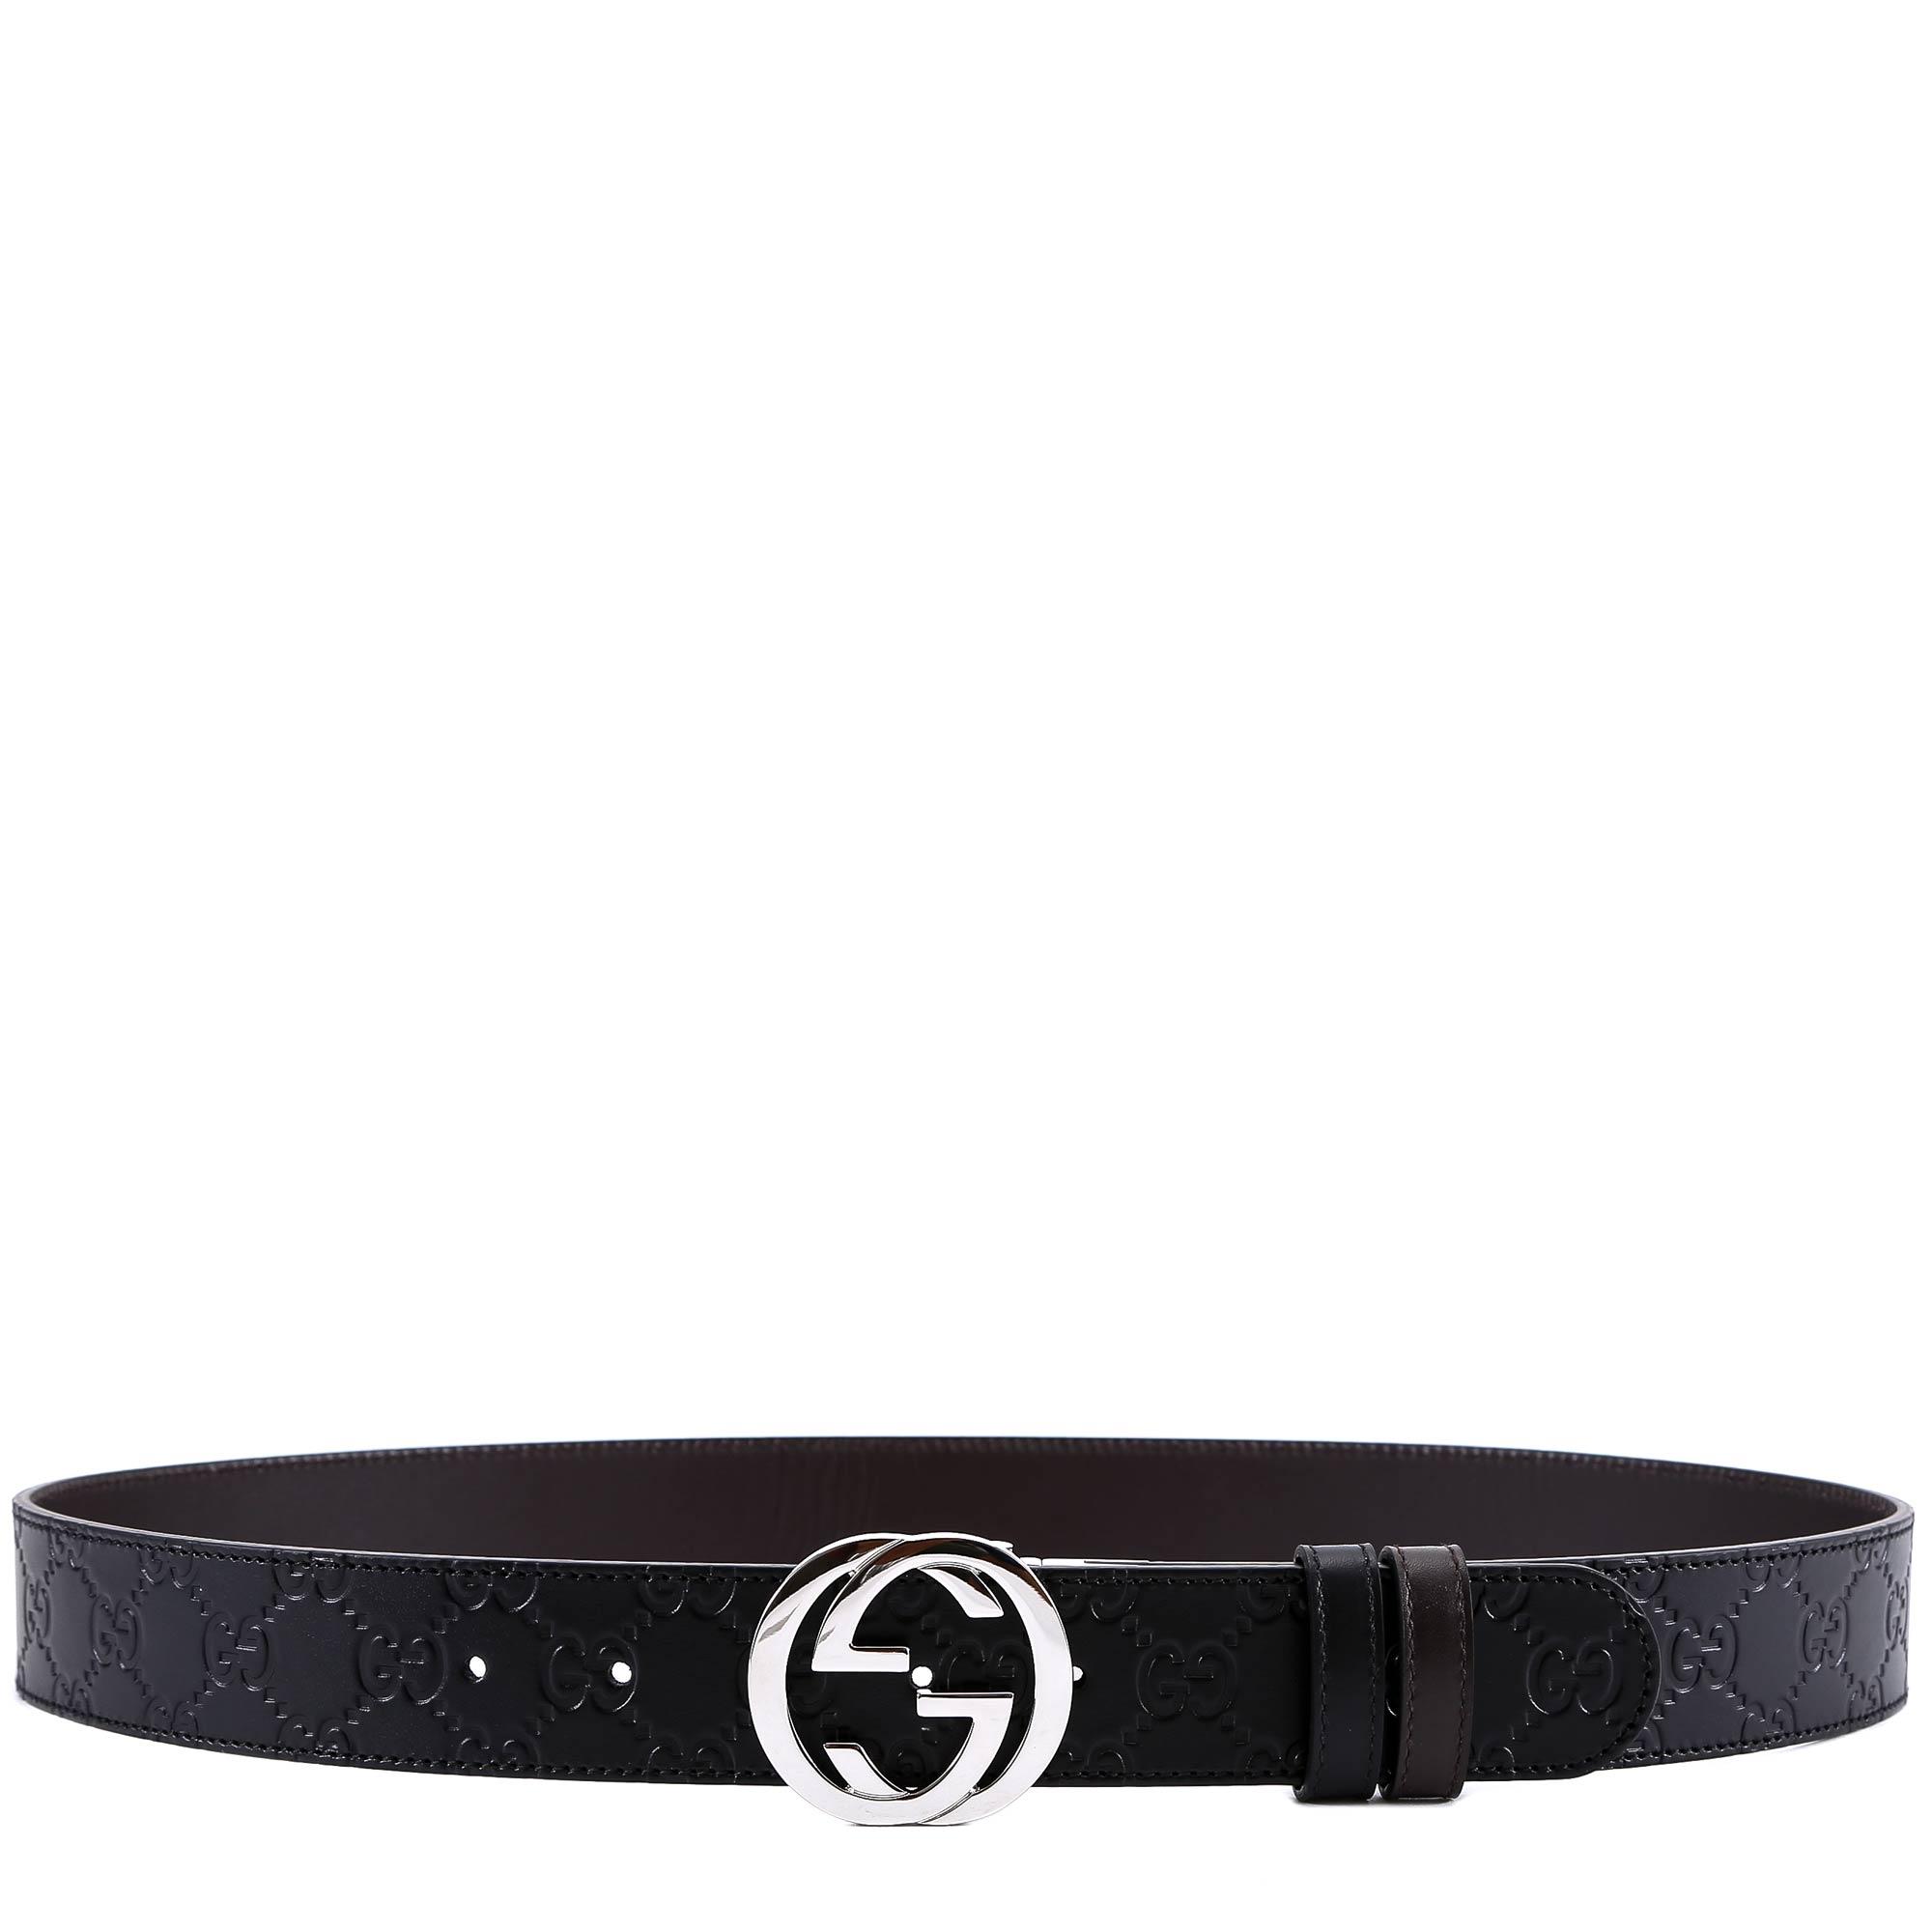 Gucci Leather Reversible Signature Belt in Black for Men - Lyst